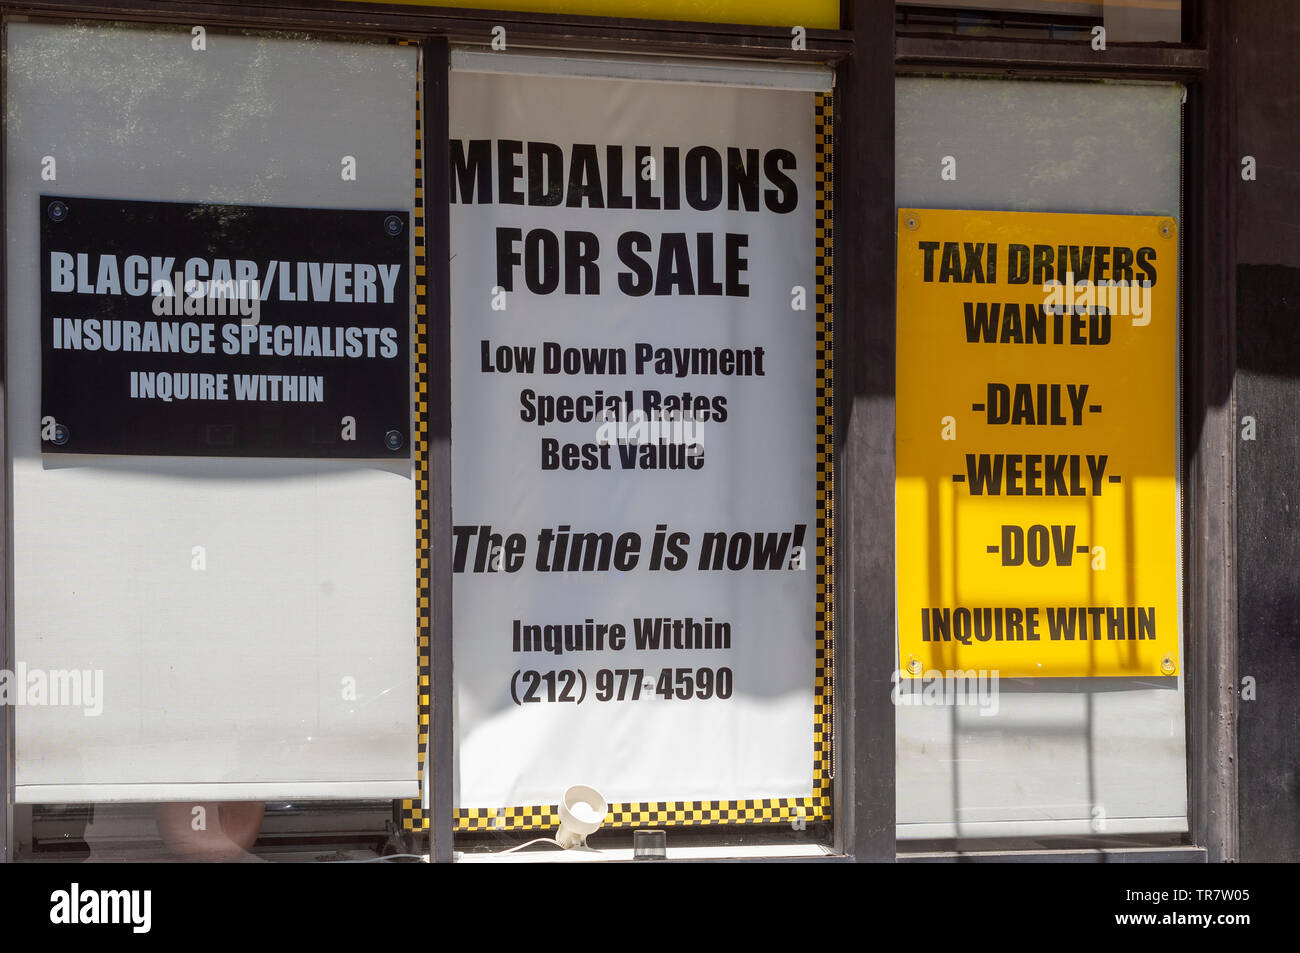 A taxi medallion broker’s offices in New York on Sunday, May 26, 2019. Following an investigation by the New York Times the NYS Attorney General has launched a probe into the taxi medallion business and its loan practices. (© Richard B. Levine) Stock Photo